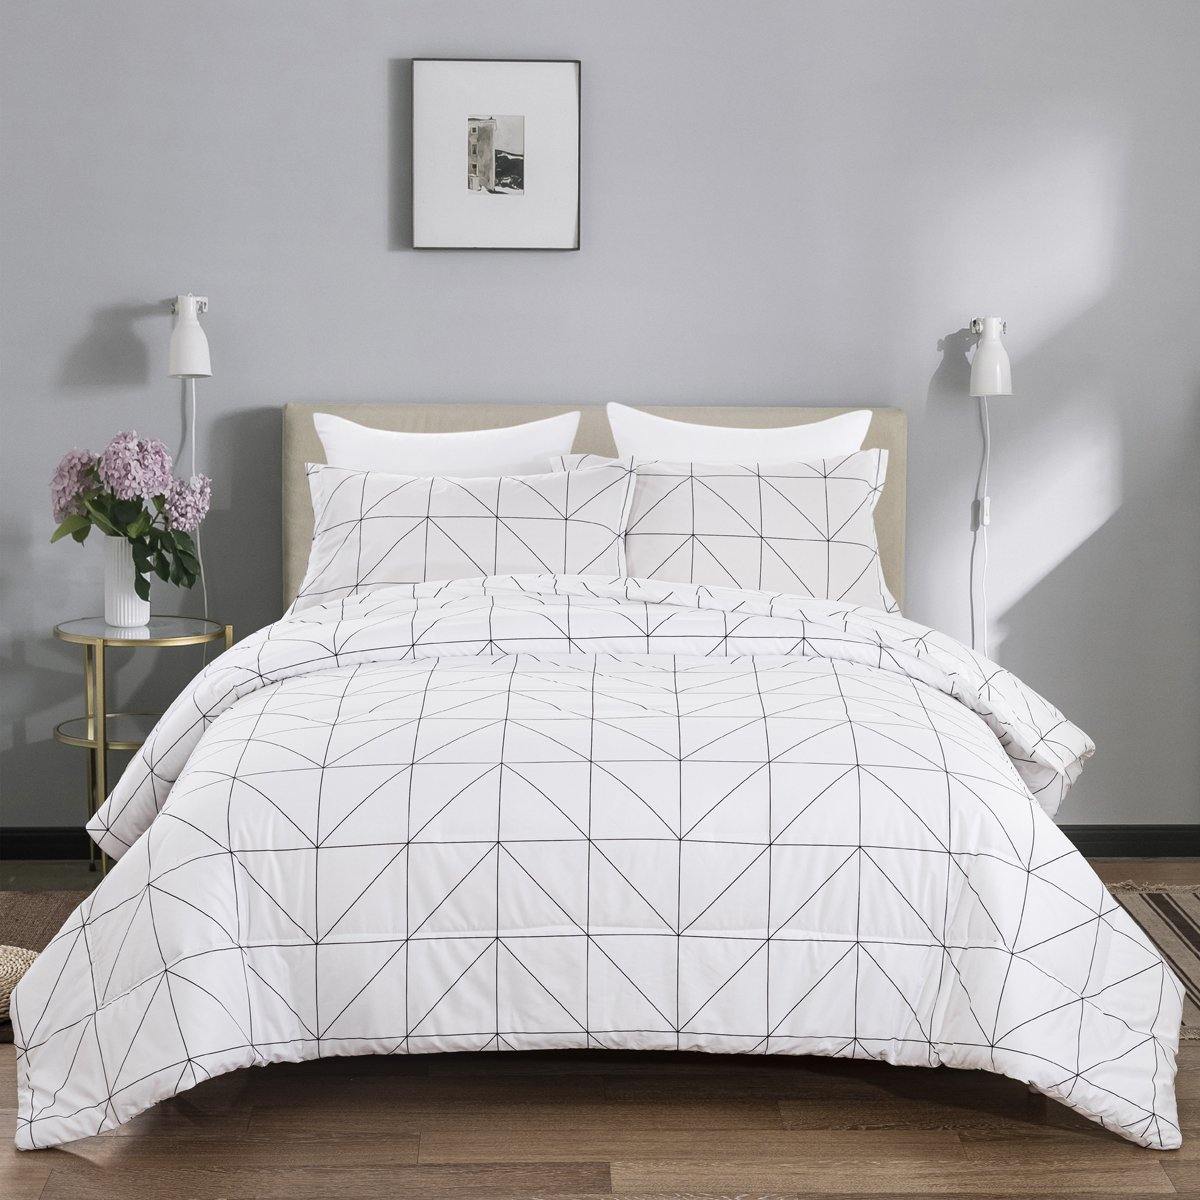 WONGS BEDDING White minimalist lines Comforter set 3 Pieces Bedding Comforter with 2 Pillow Cases - Wongs bedding